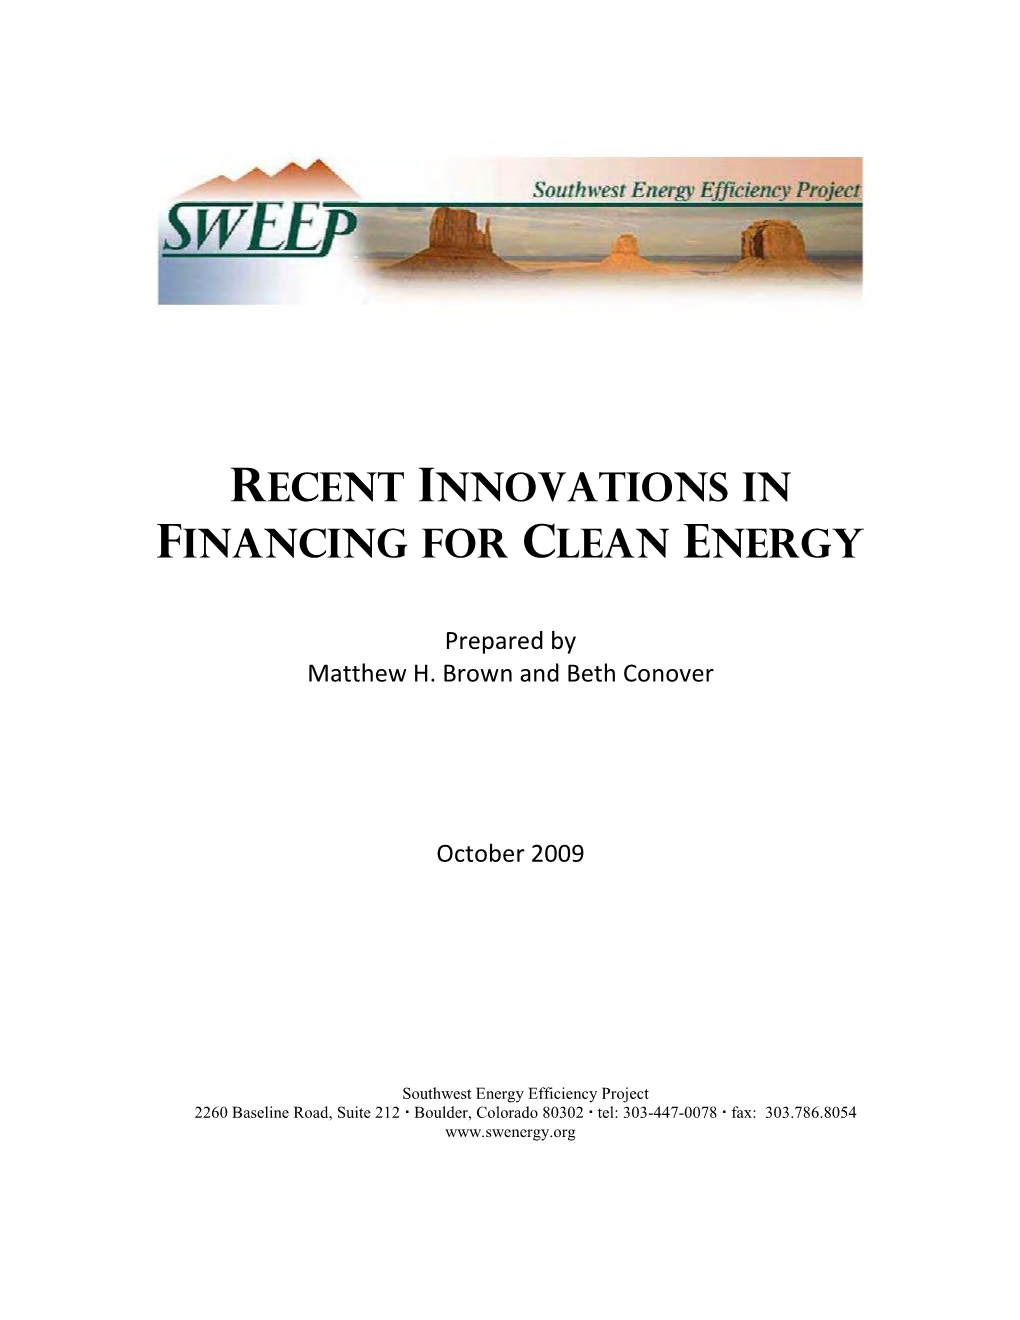 Recent Innovations in Financing for Clean Energy